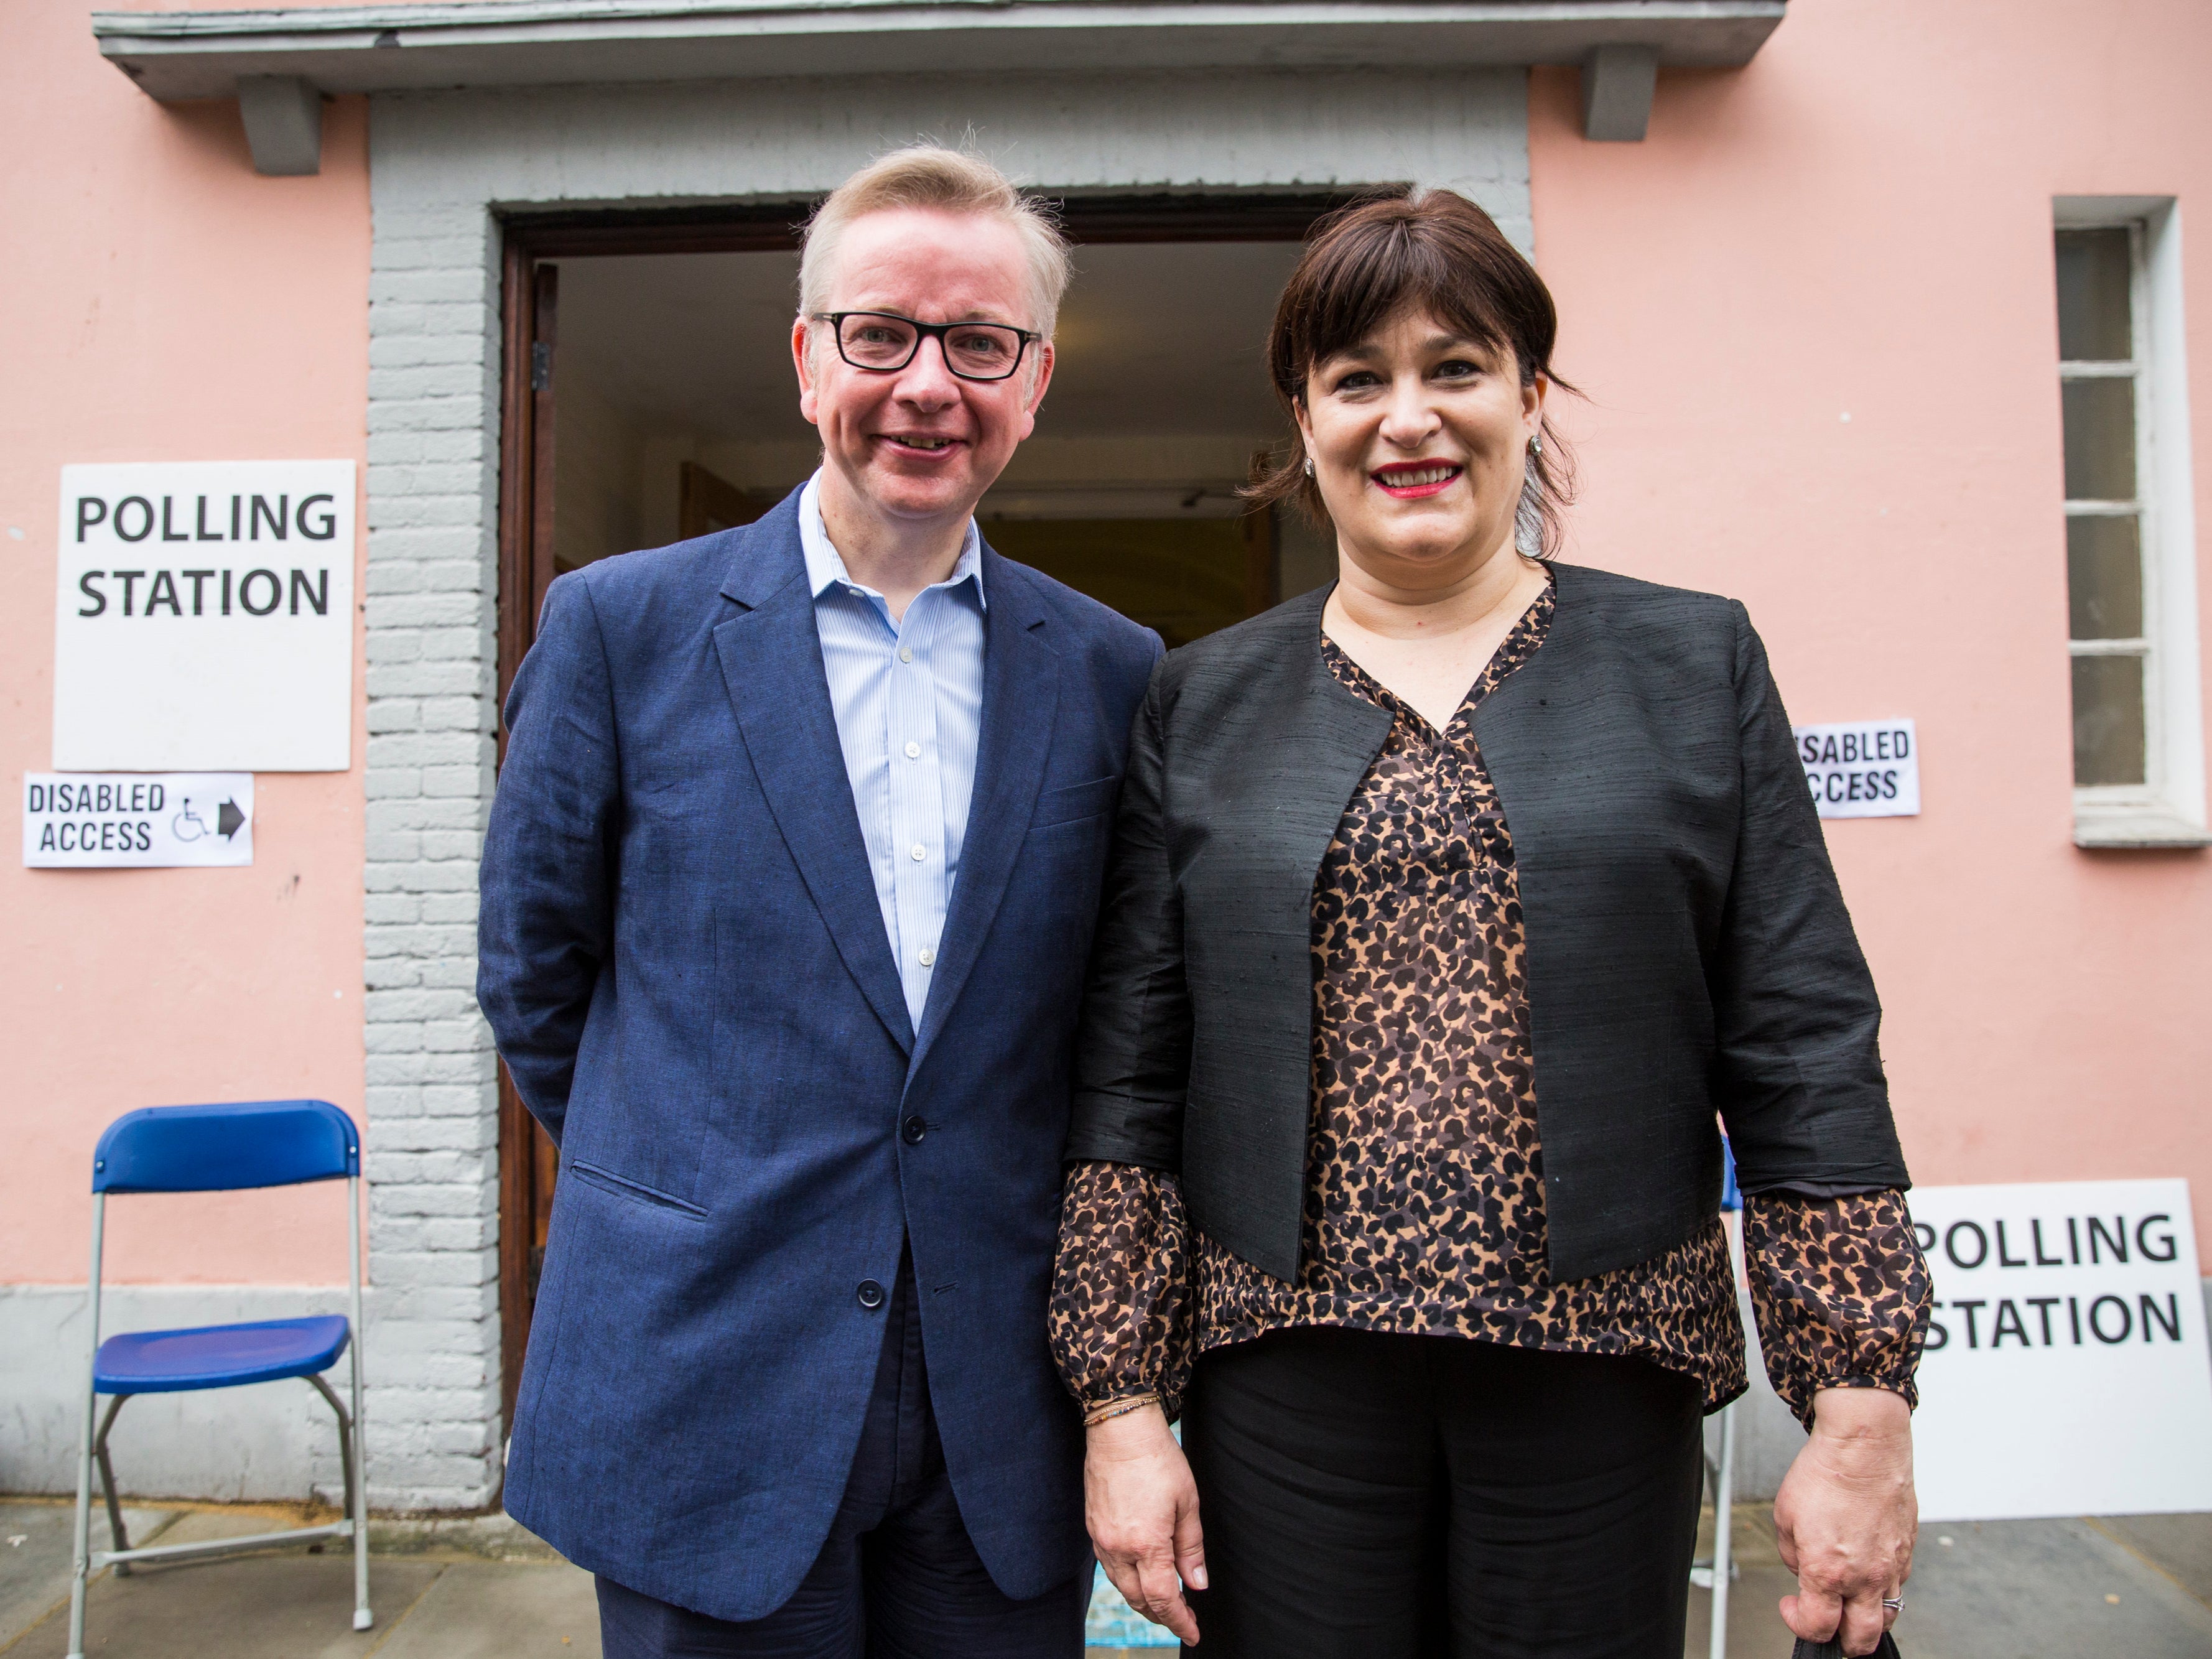 Michael Gove and Sarah Vine pictured together in 2016